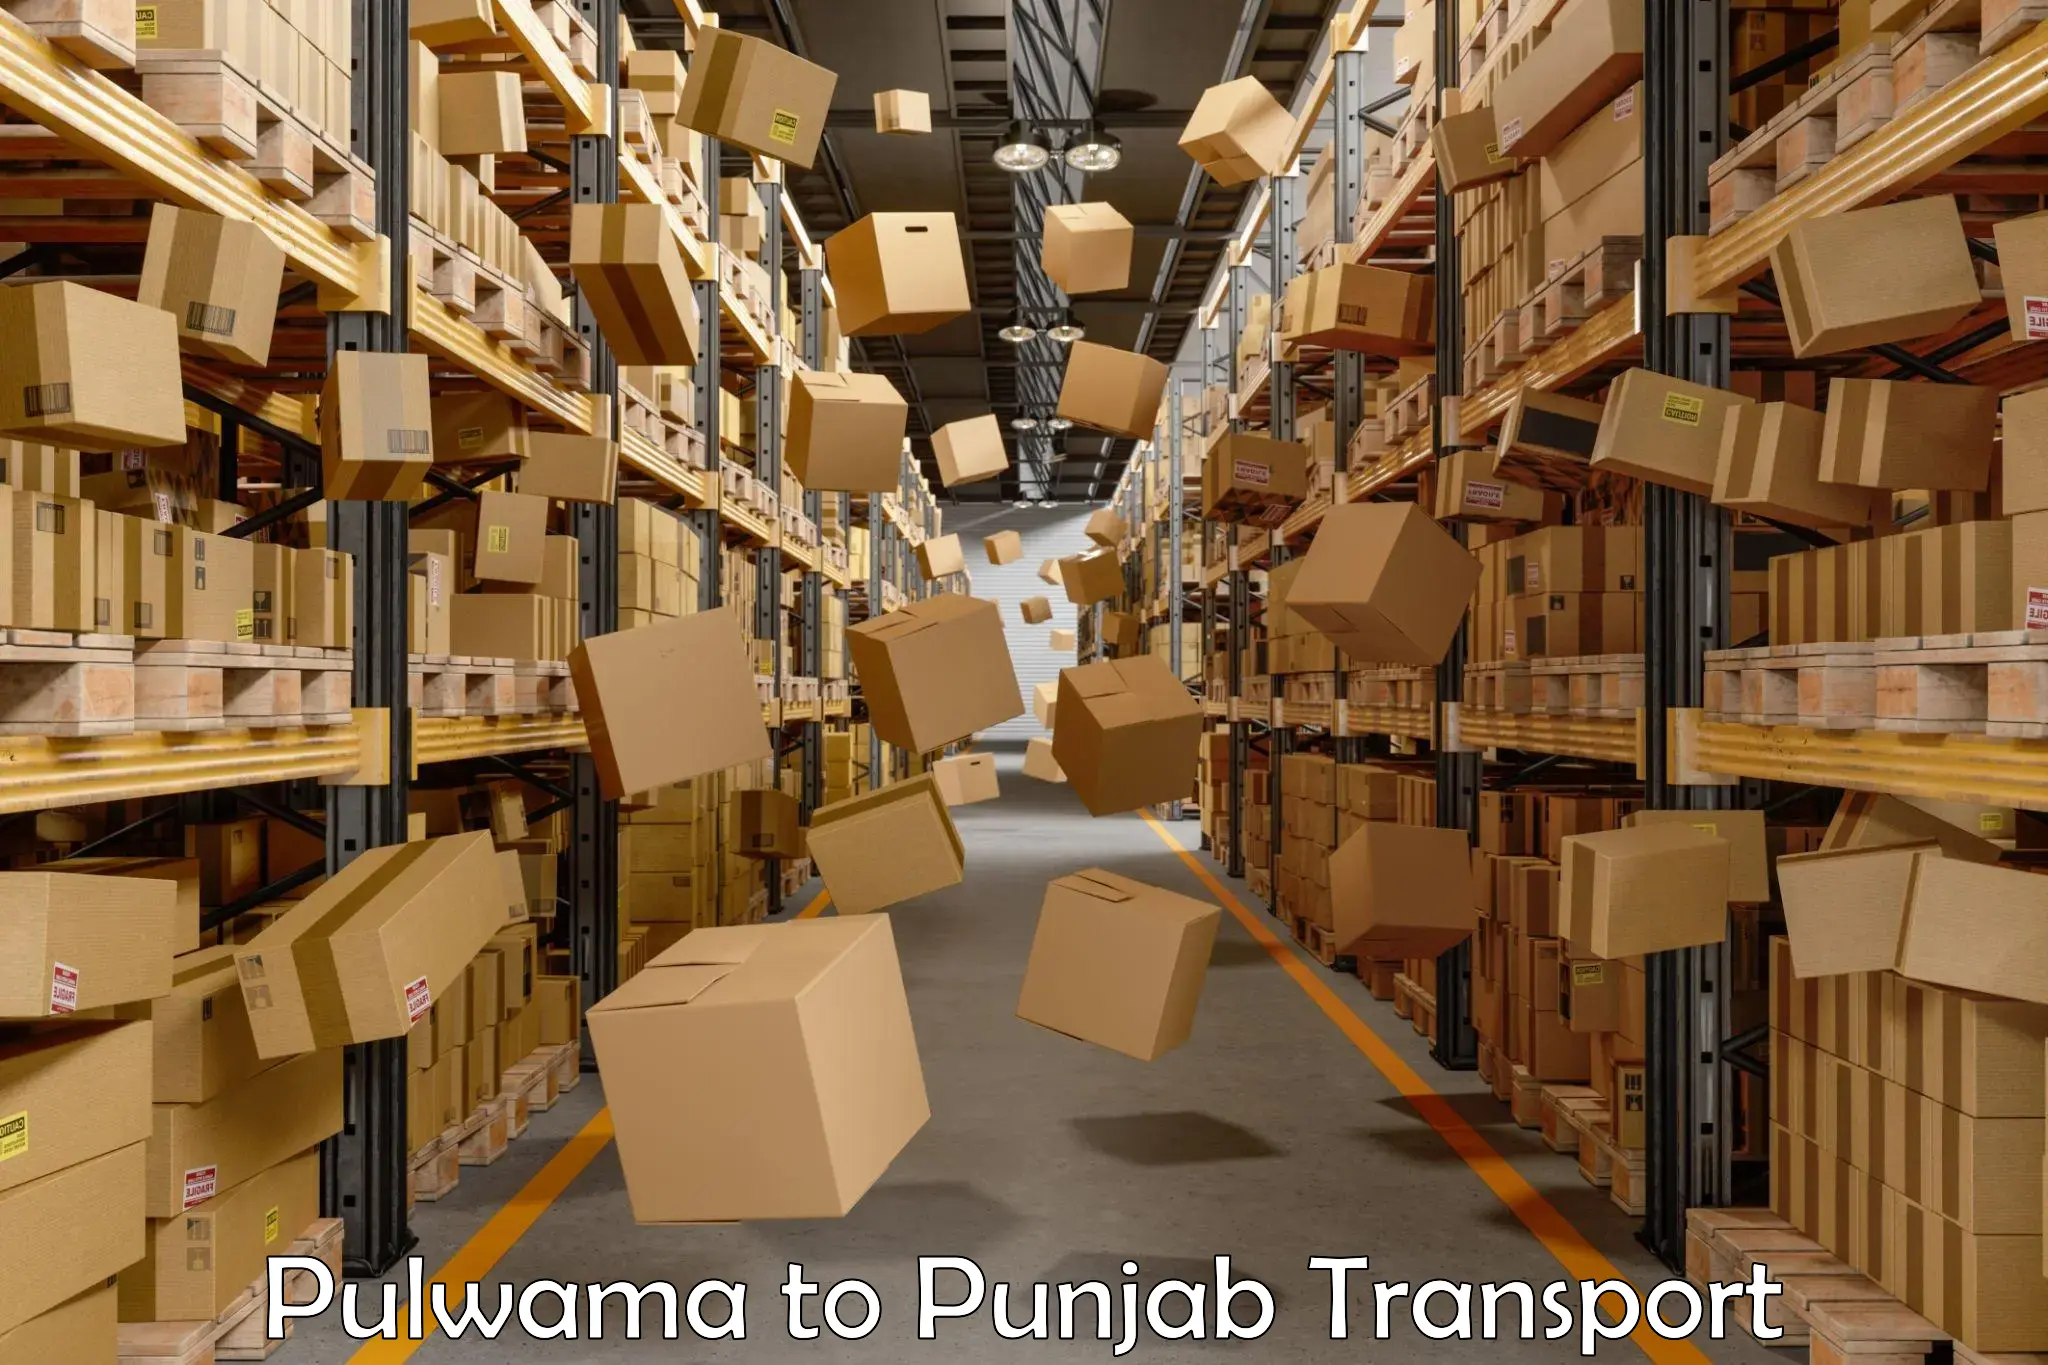 Online transport service Pulwama to Malout